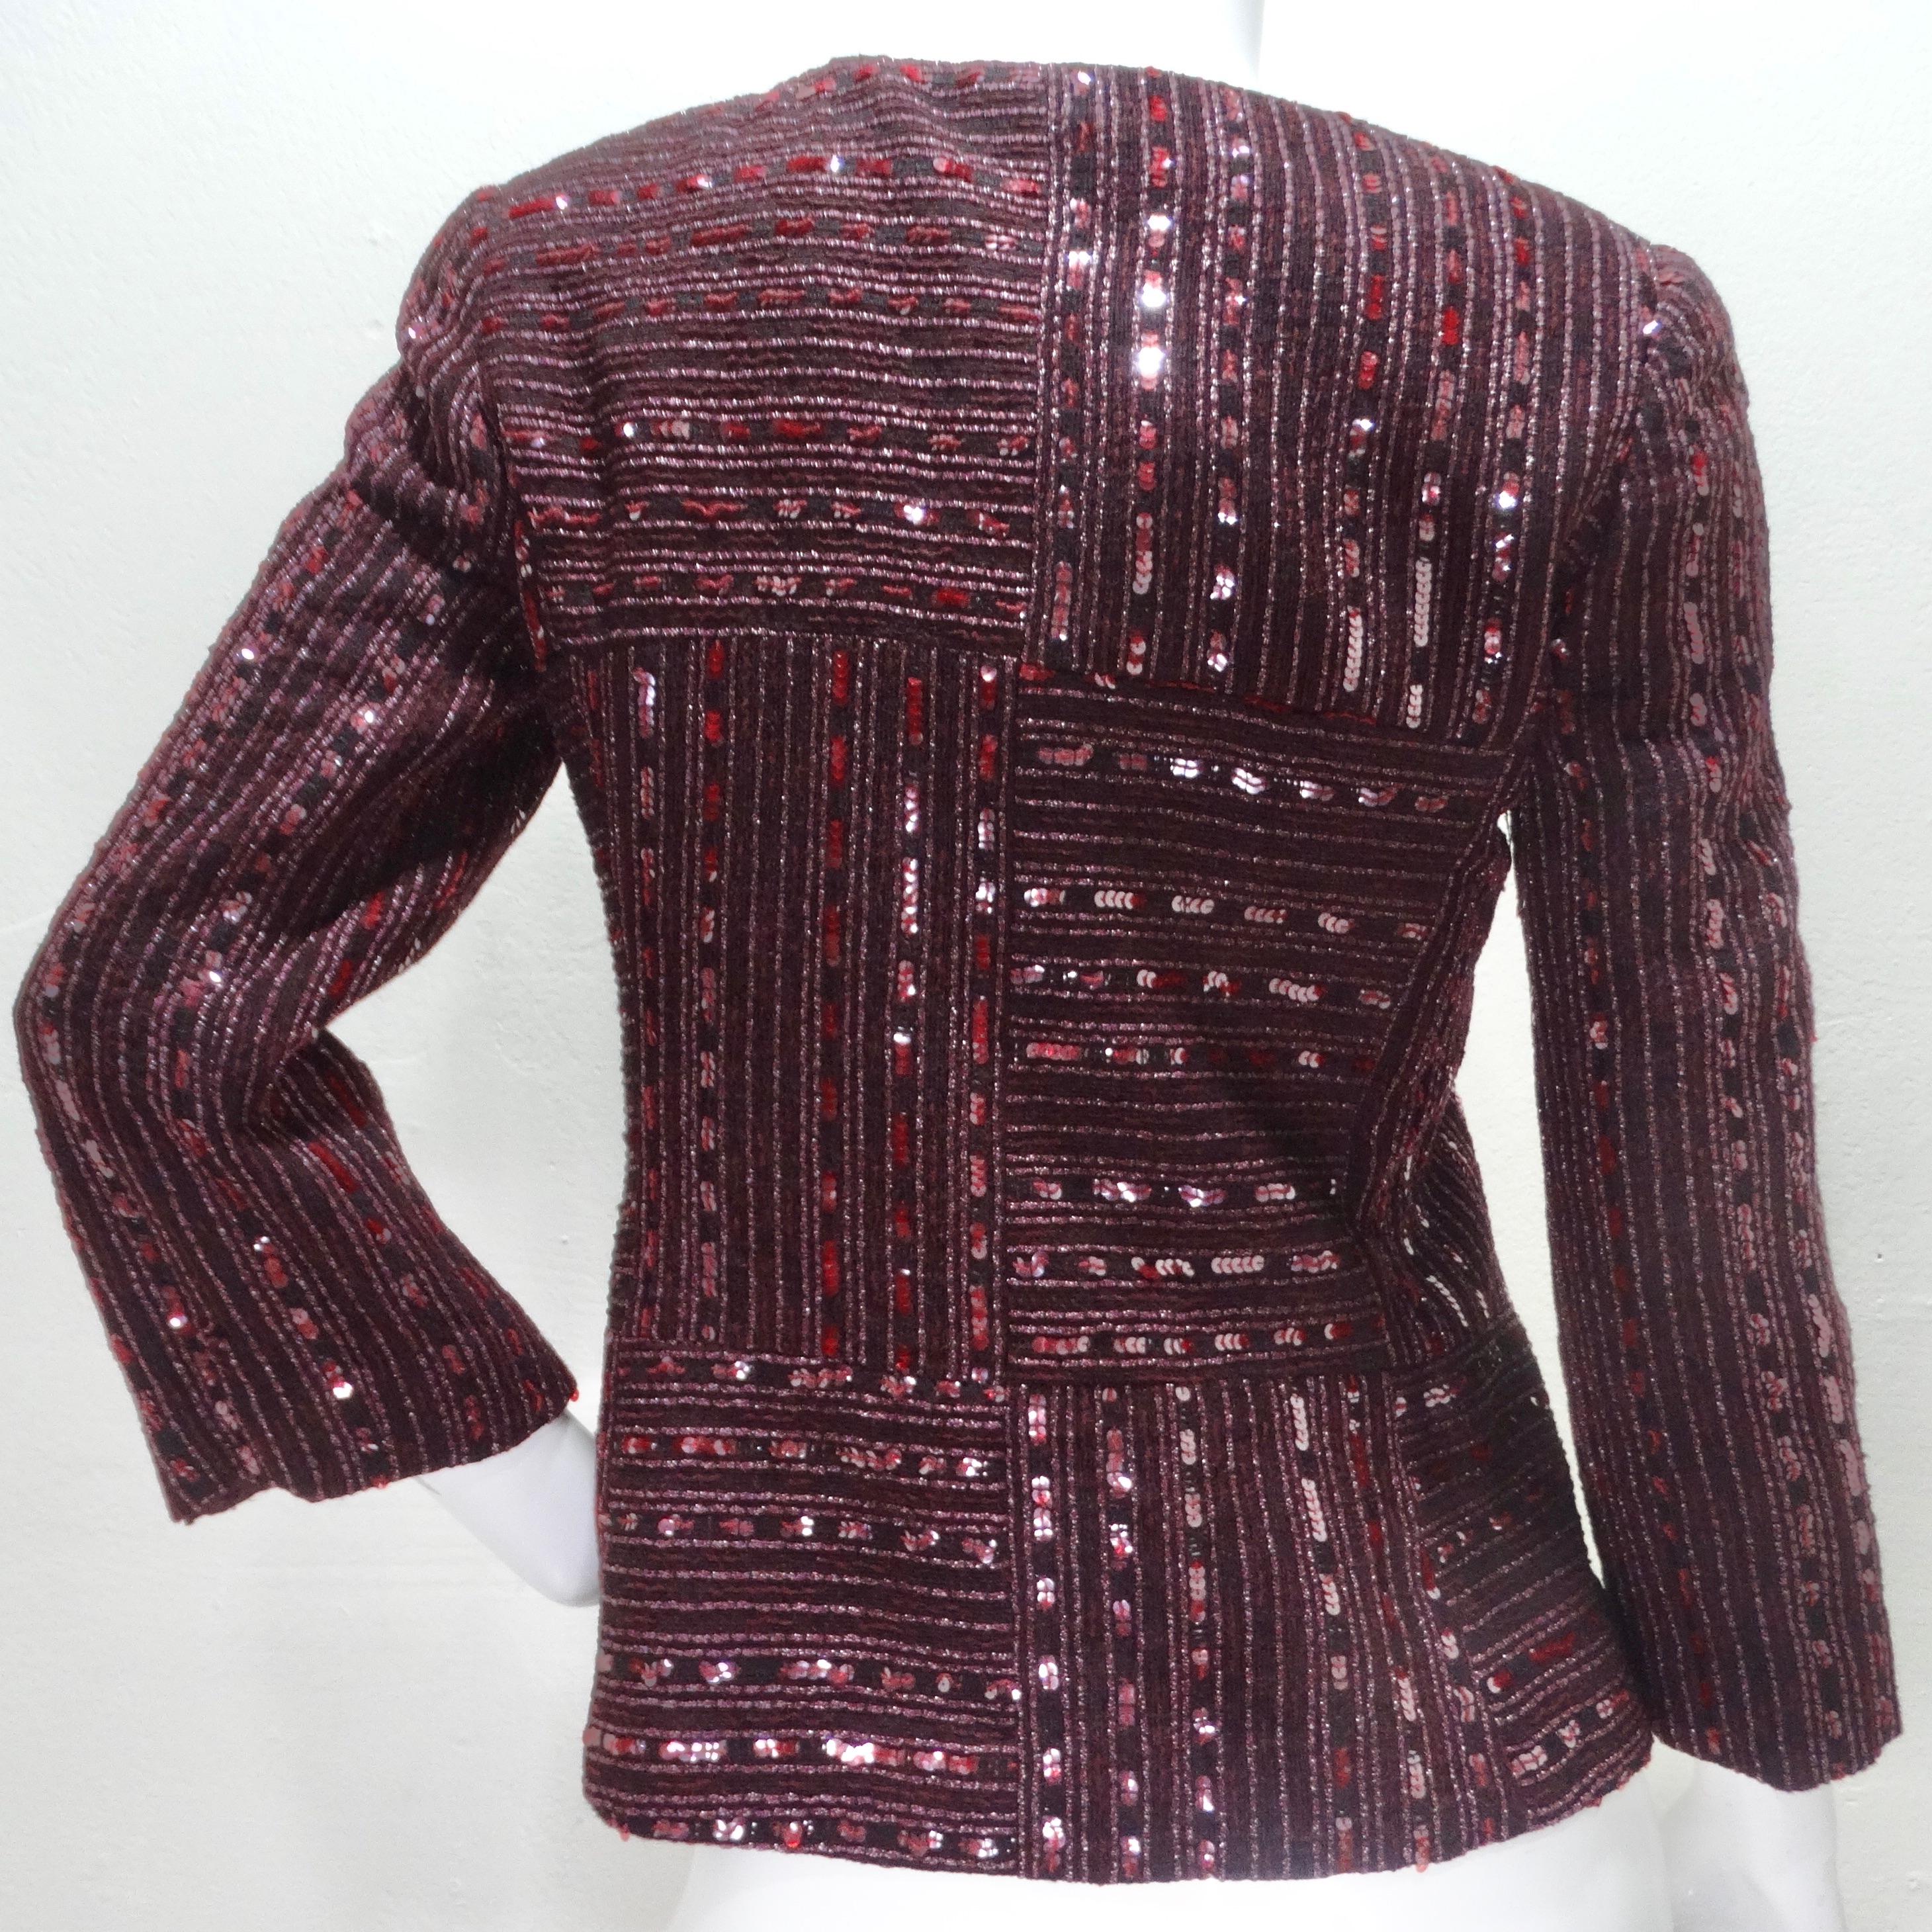 Chanel Cruise 2000 Sequin Evening Jacket For Sale 1